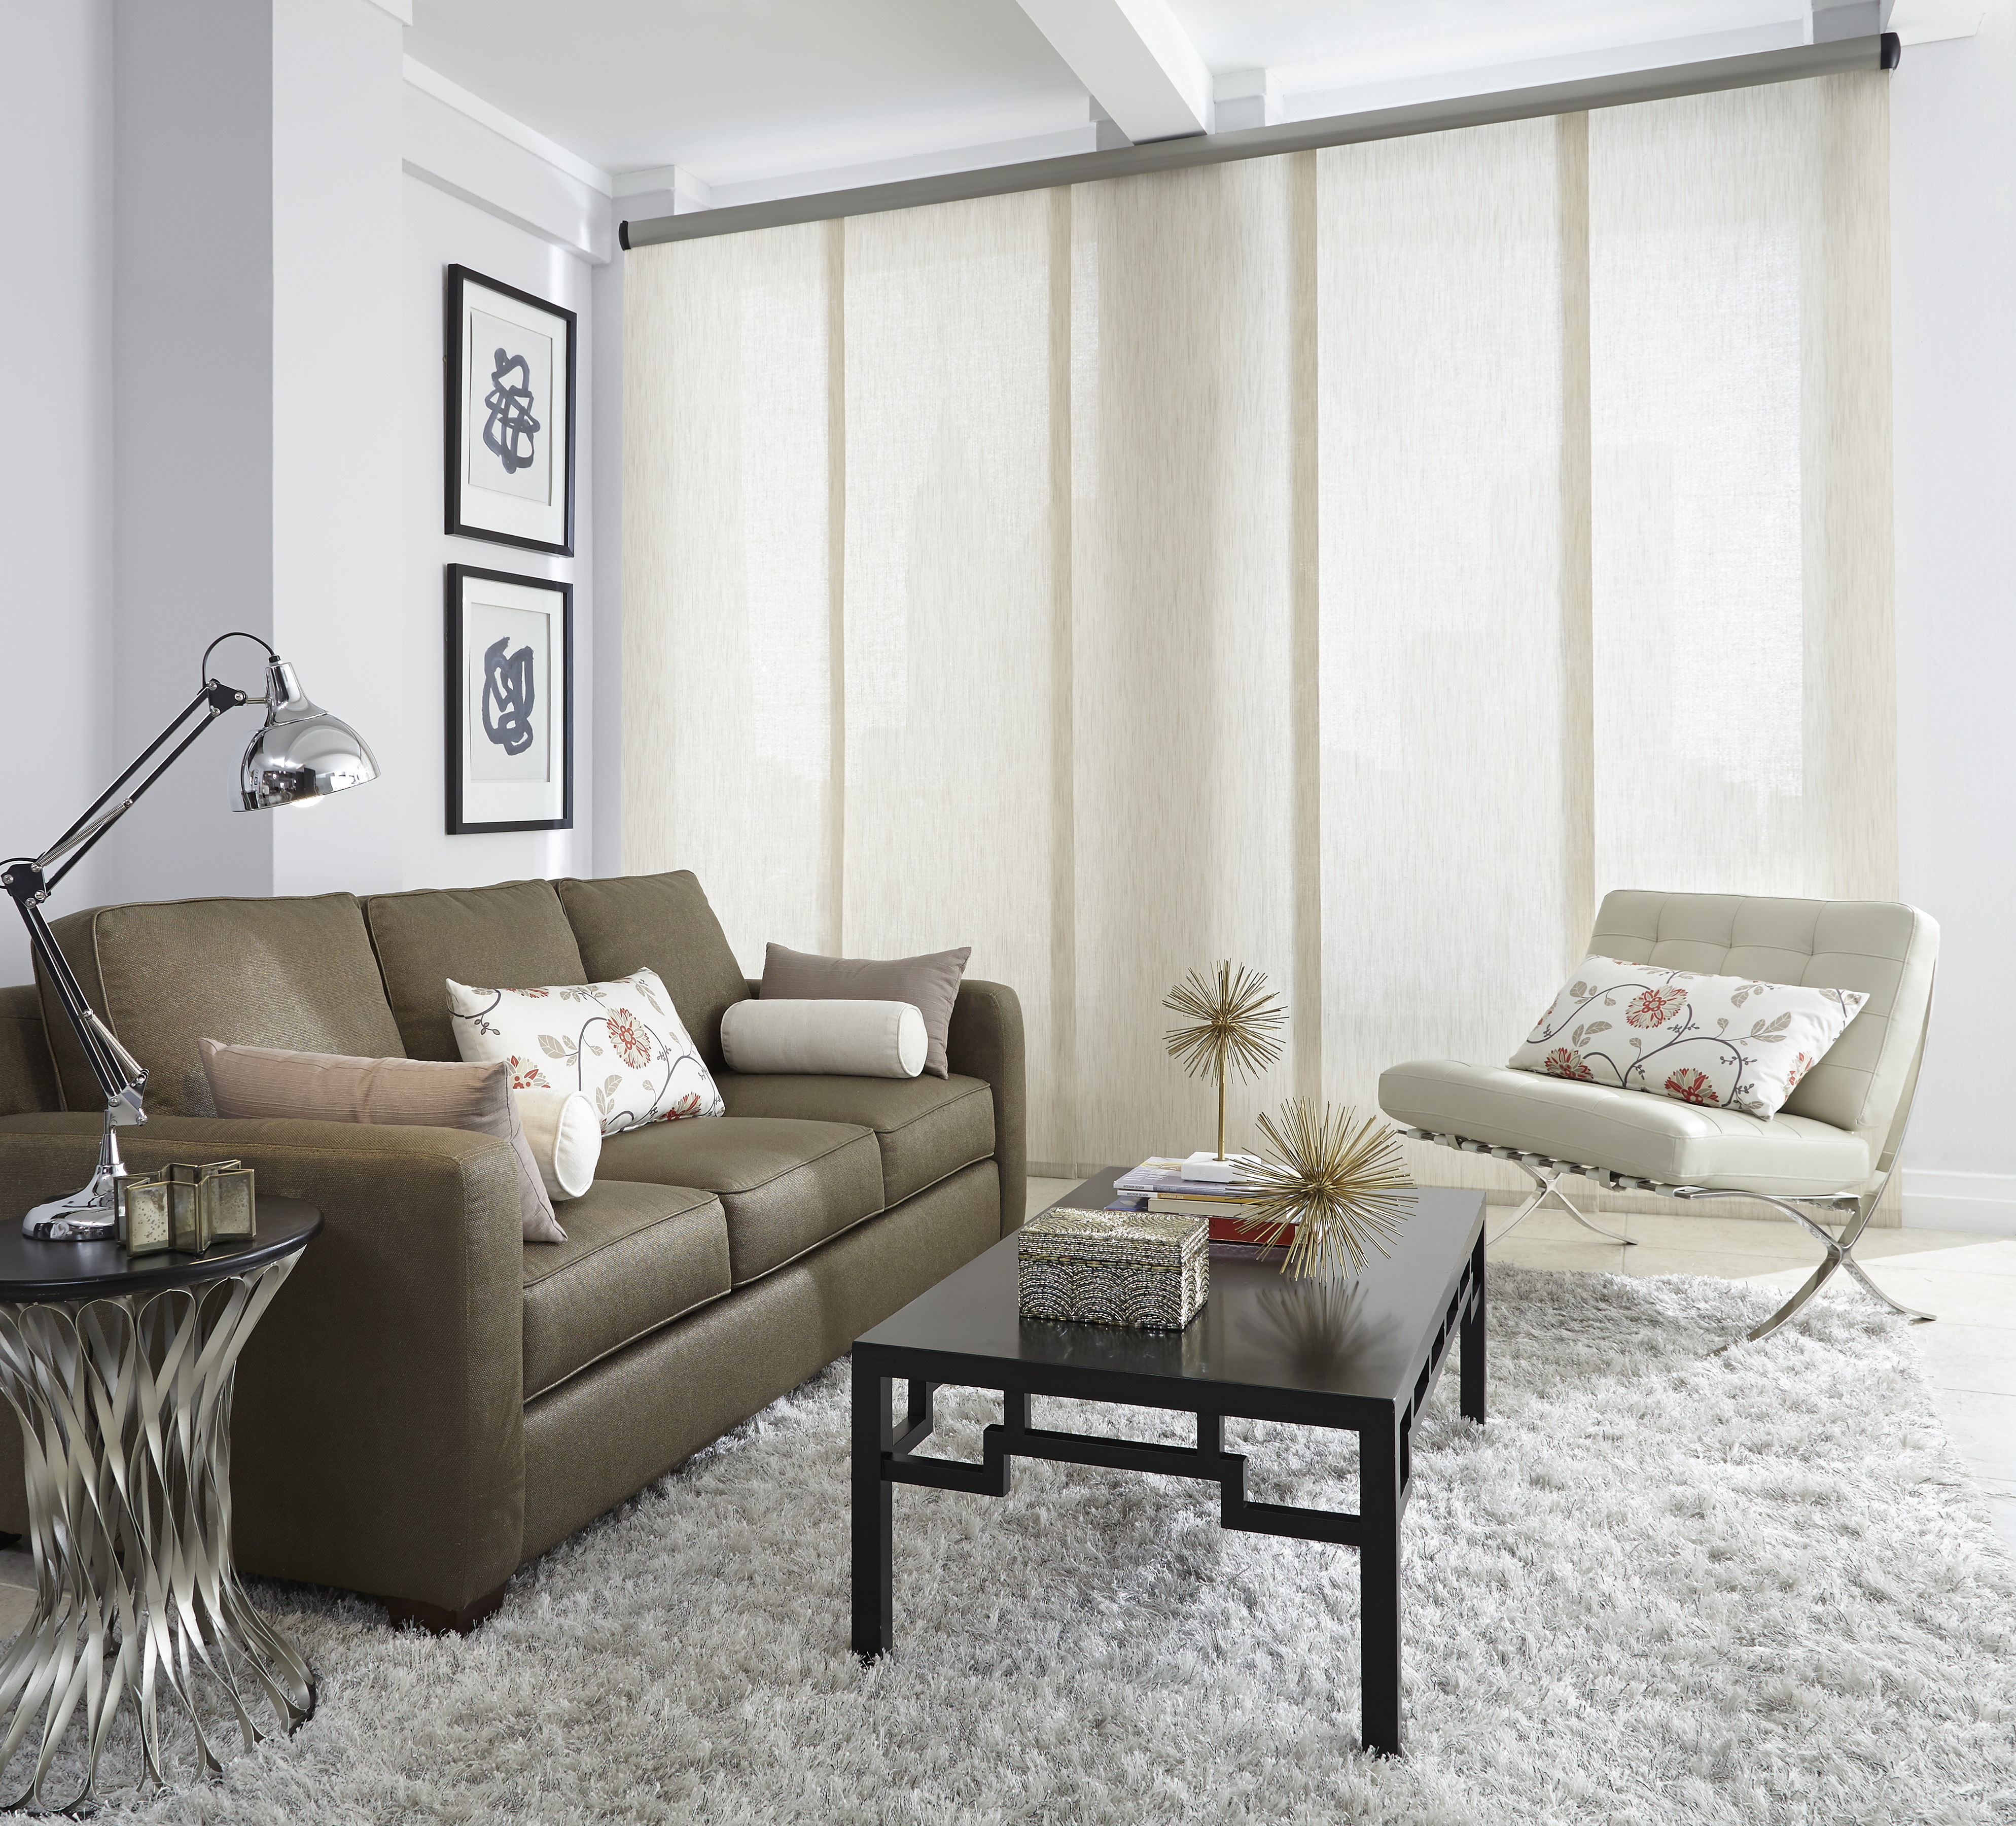 Light-tan colored Genesis® Panel Track System in a room with a brown couch, white chair, and Interior Masterpieces® Custom Pillows